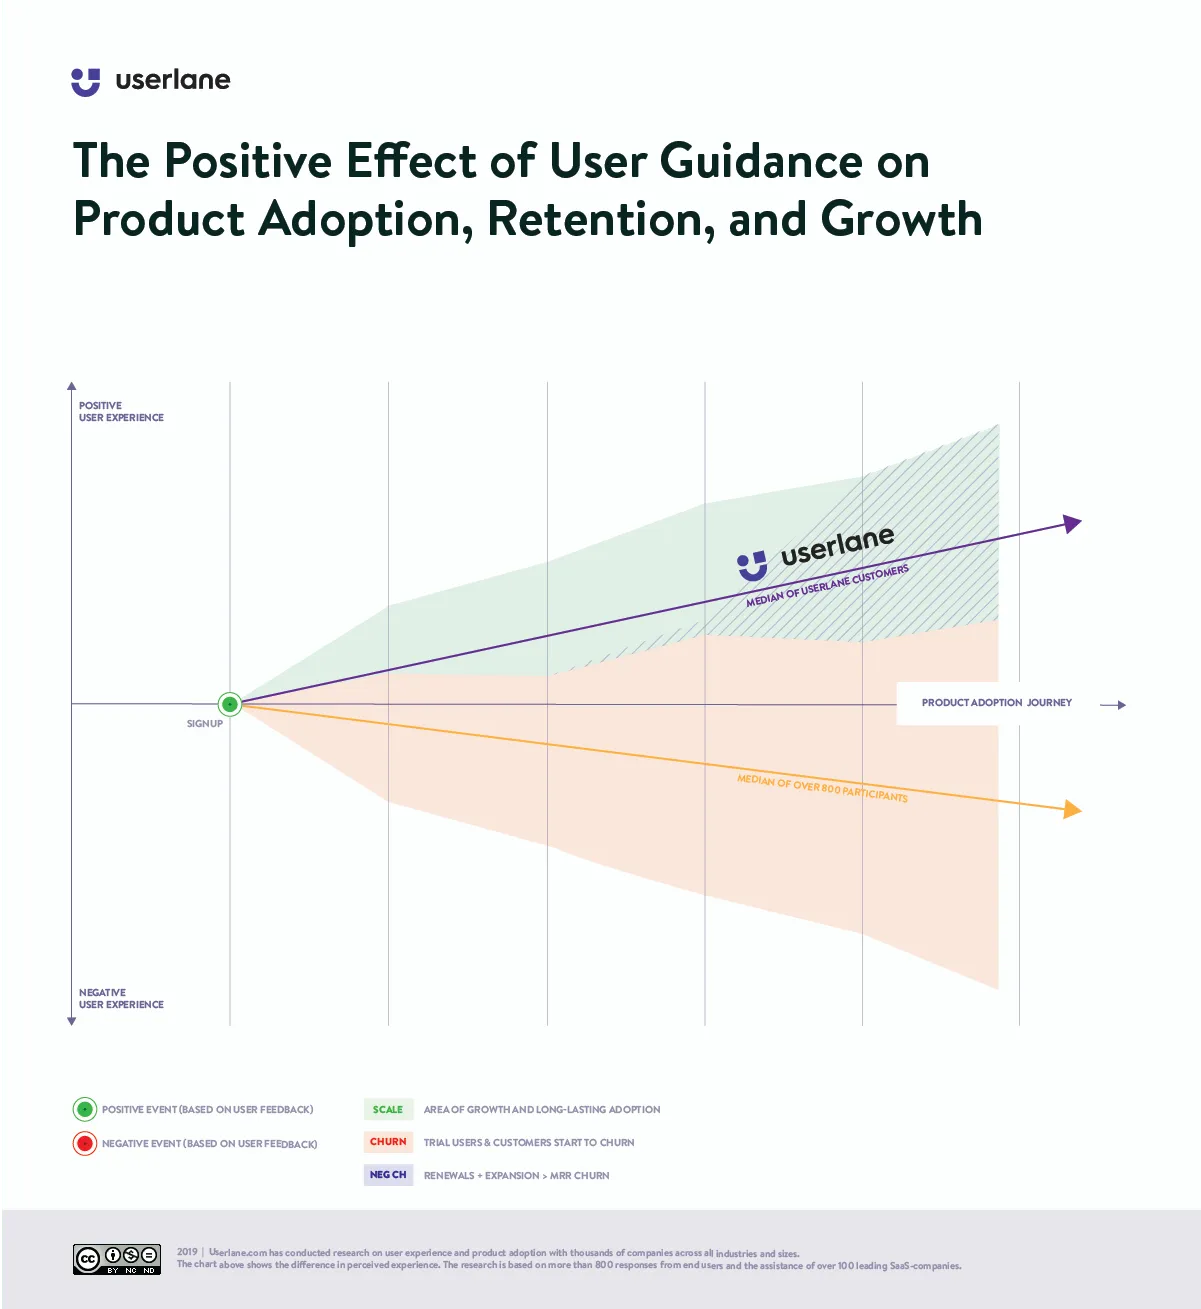 Chart: the positive effect of interactive user guidance on the product adoption journey